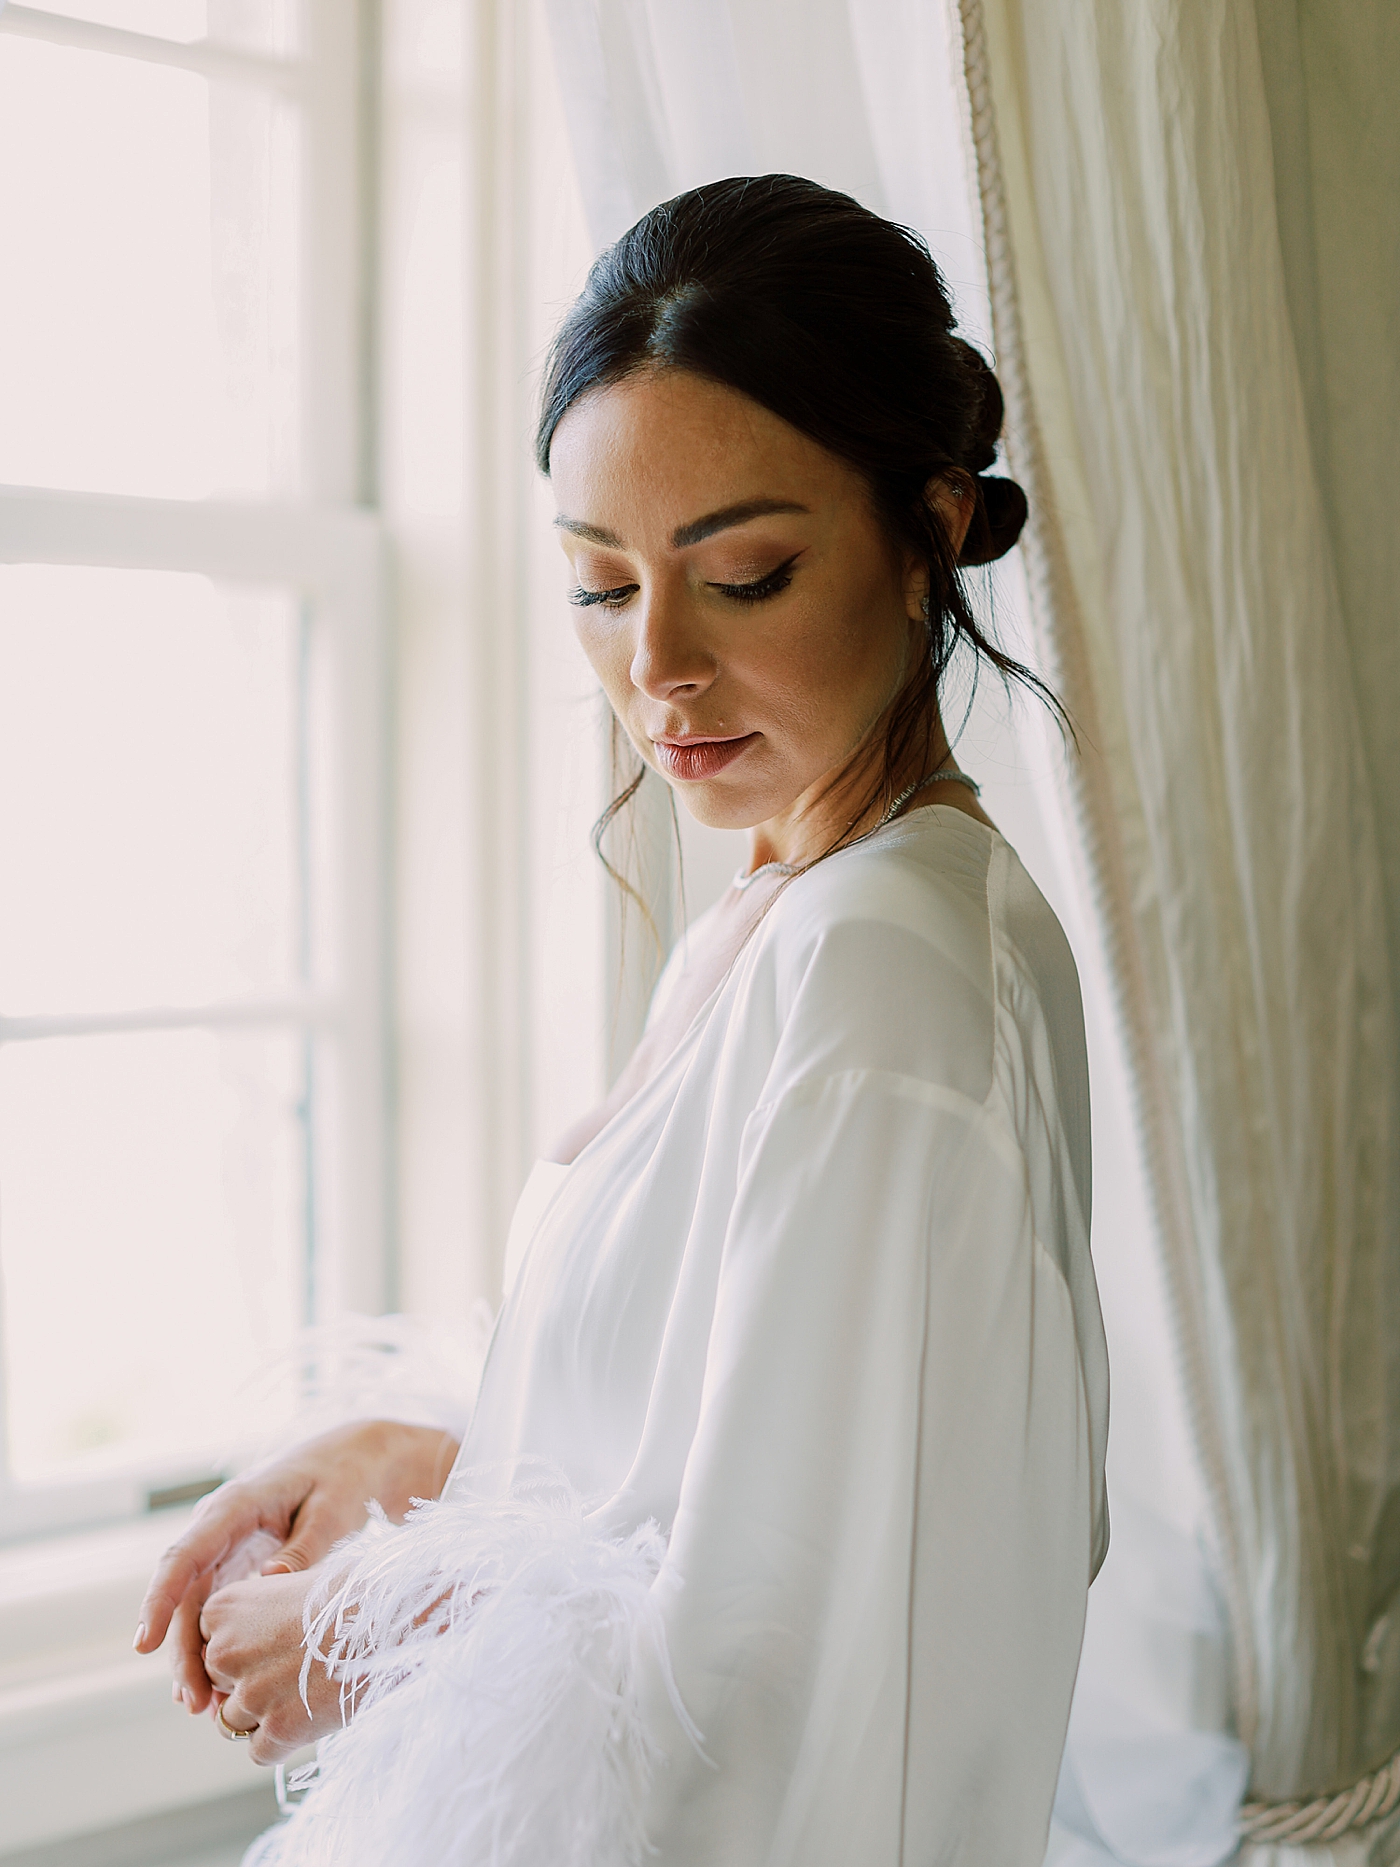 Bride in a robe standing by a window | Image by Diane Sotero Photography